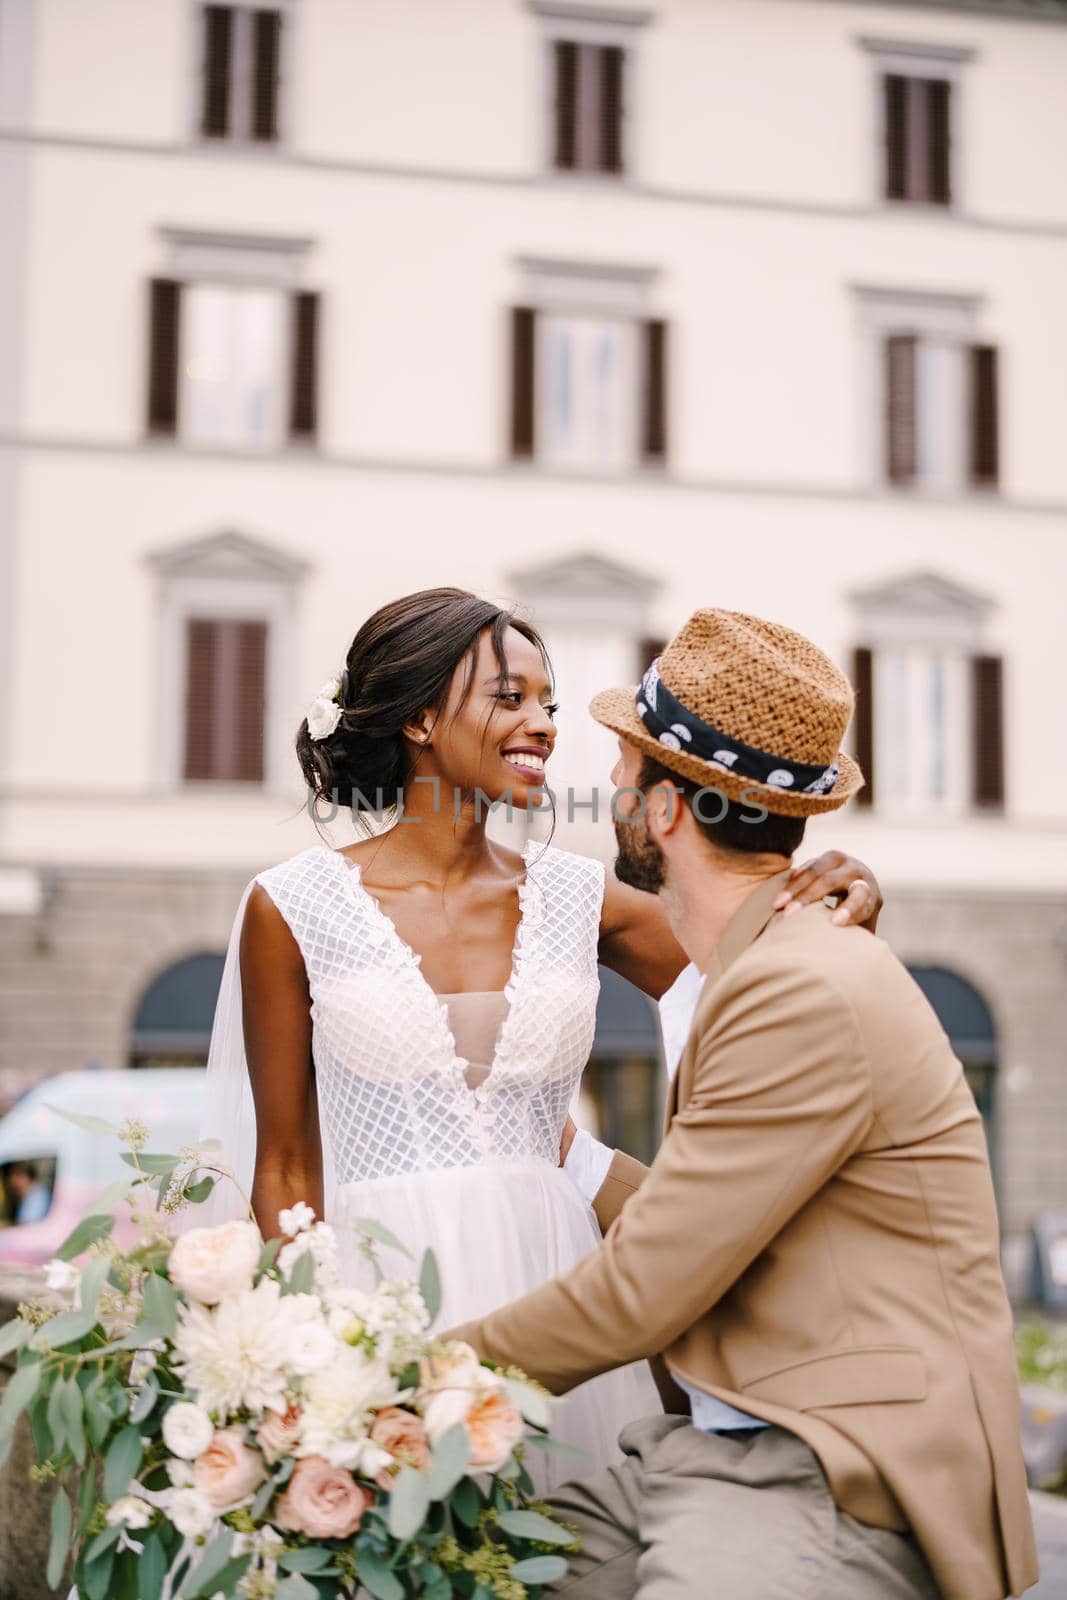 Multiracial wedding couple. Wedding in Florence, Italy. African-American bride in a white dress with a long veil and a bouquet, and Caucasian groom in a sandy jacket and straw hat. by Nadtochiy